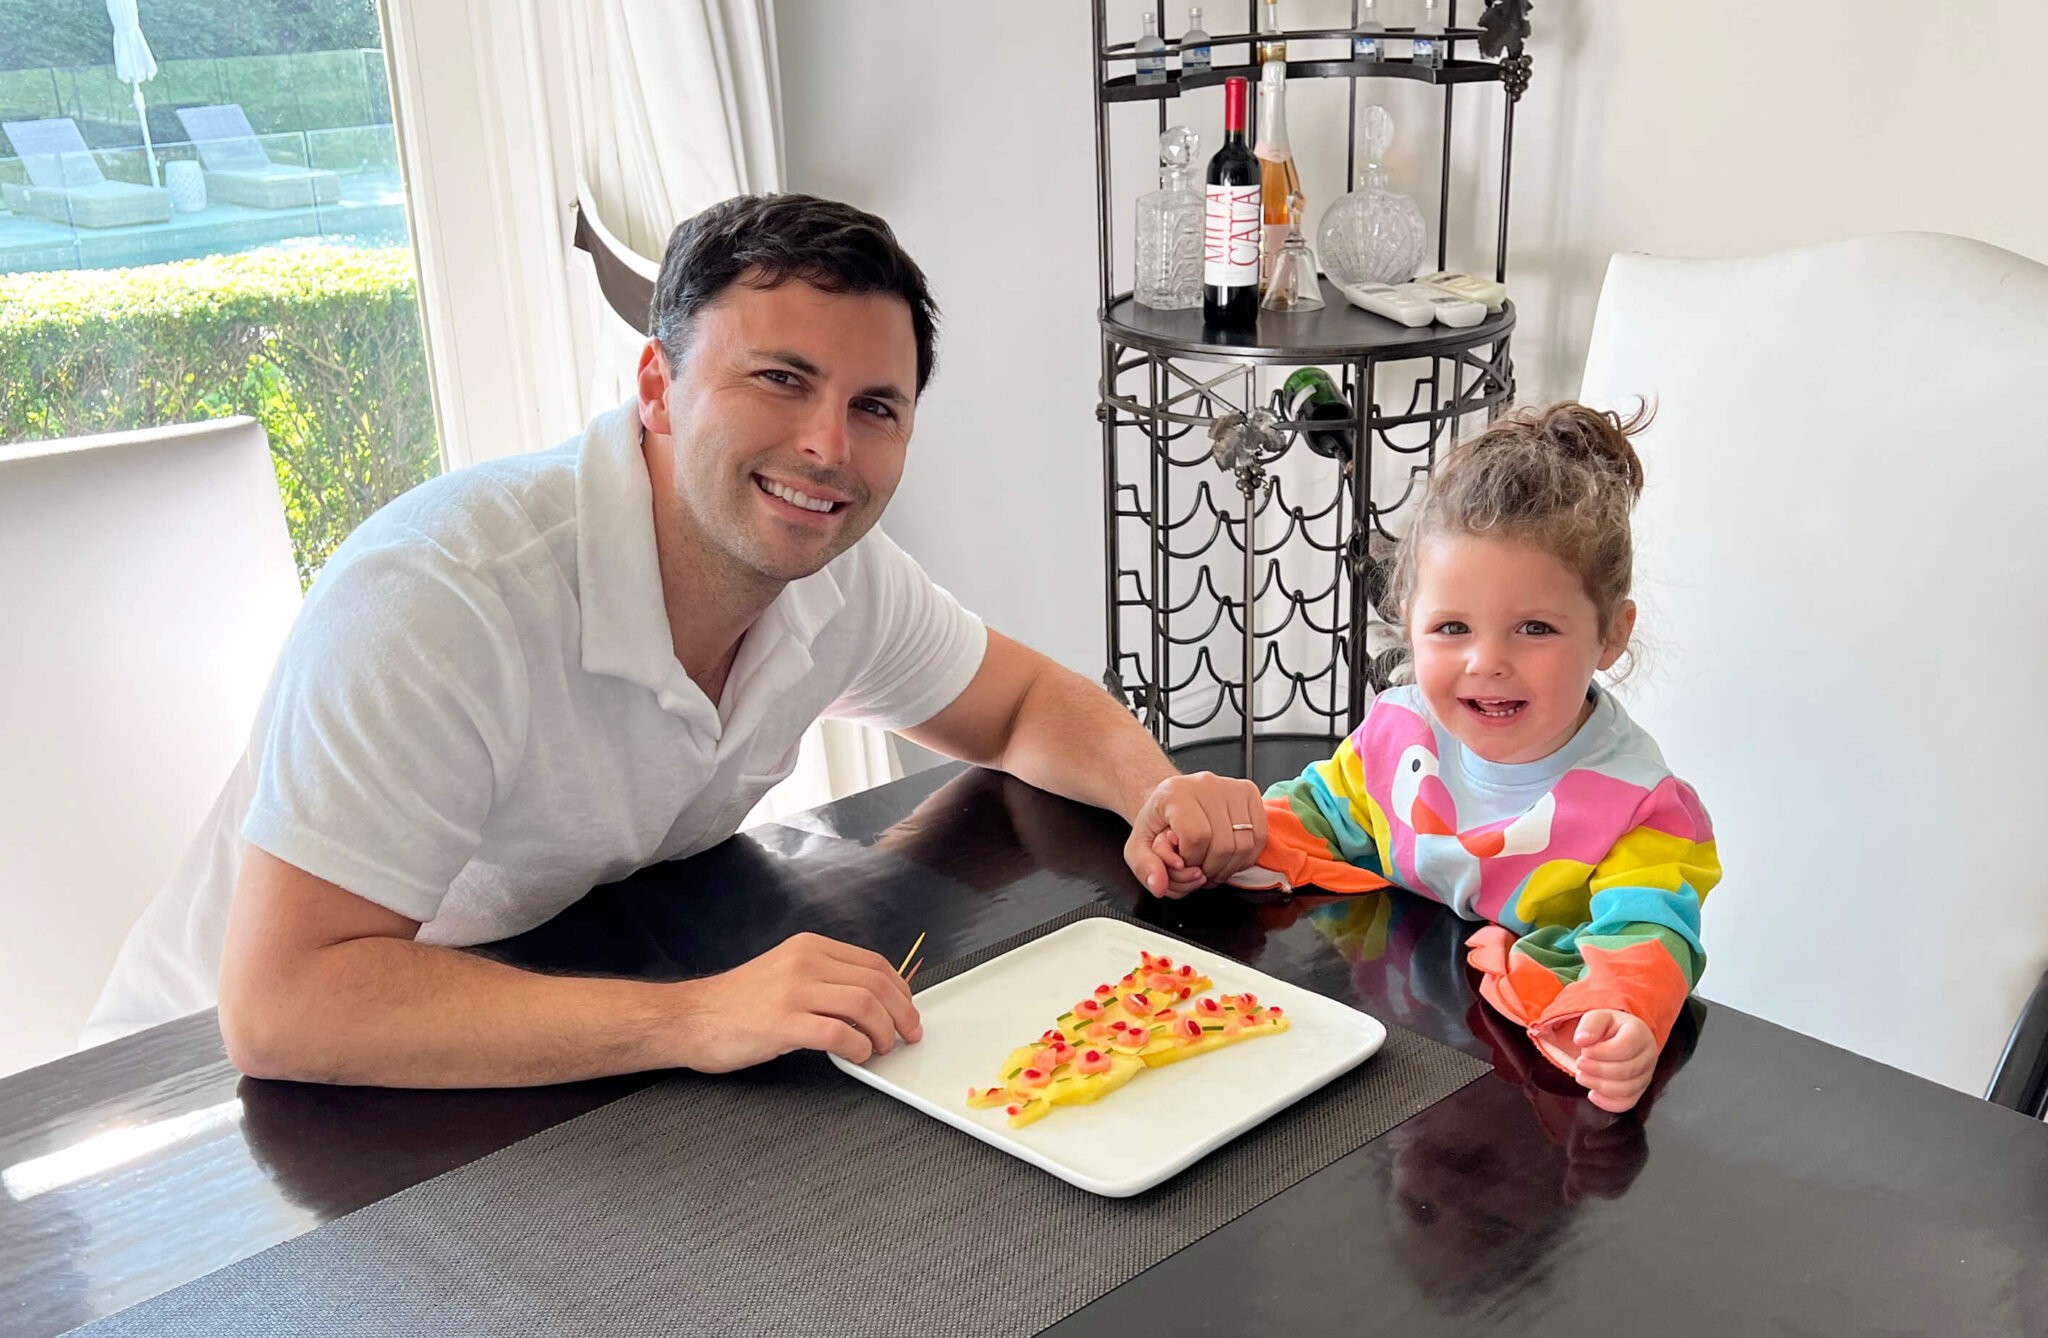 Harley Langberg and his daughter Blake make pizza out of other food